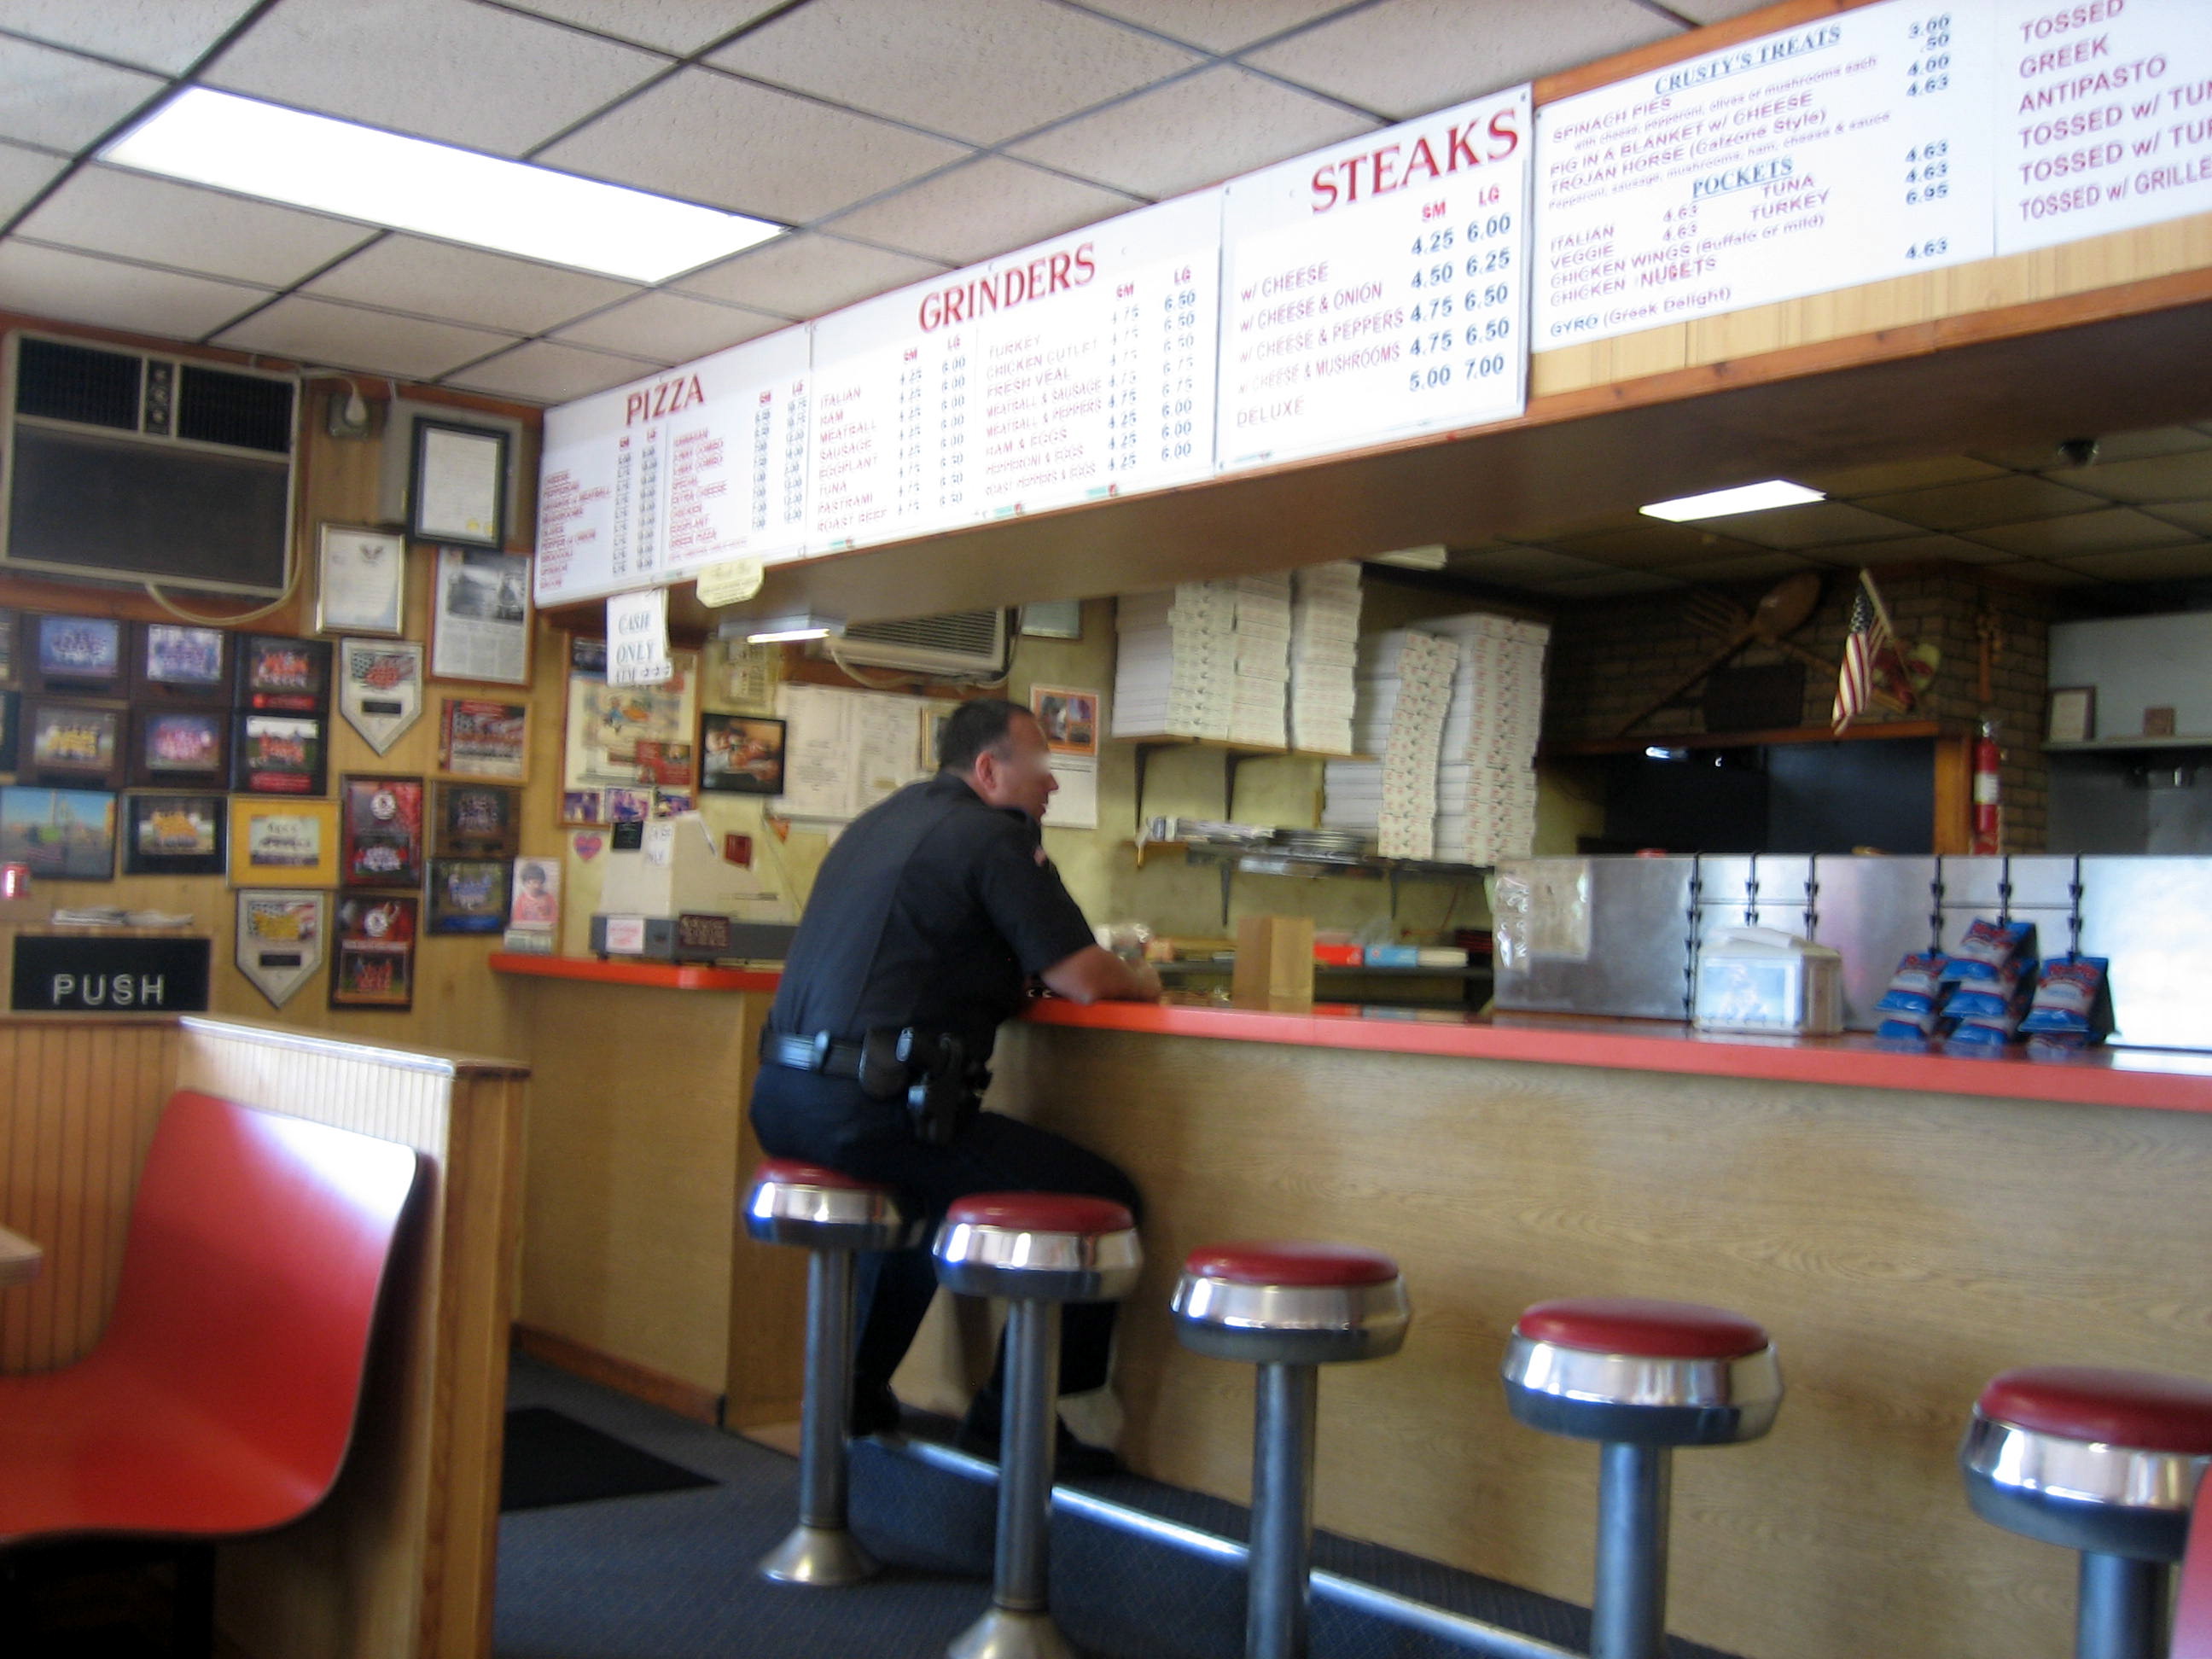 Almost every time I stop in, there's a police officer eating at the counter.